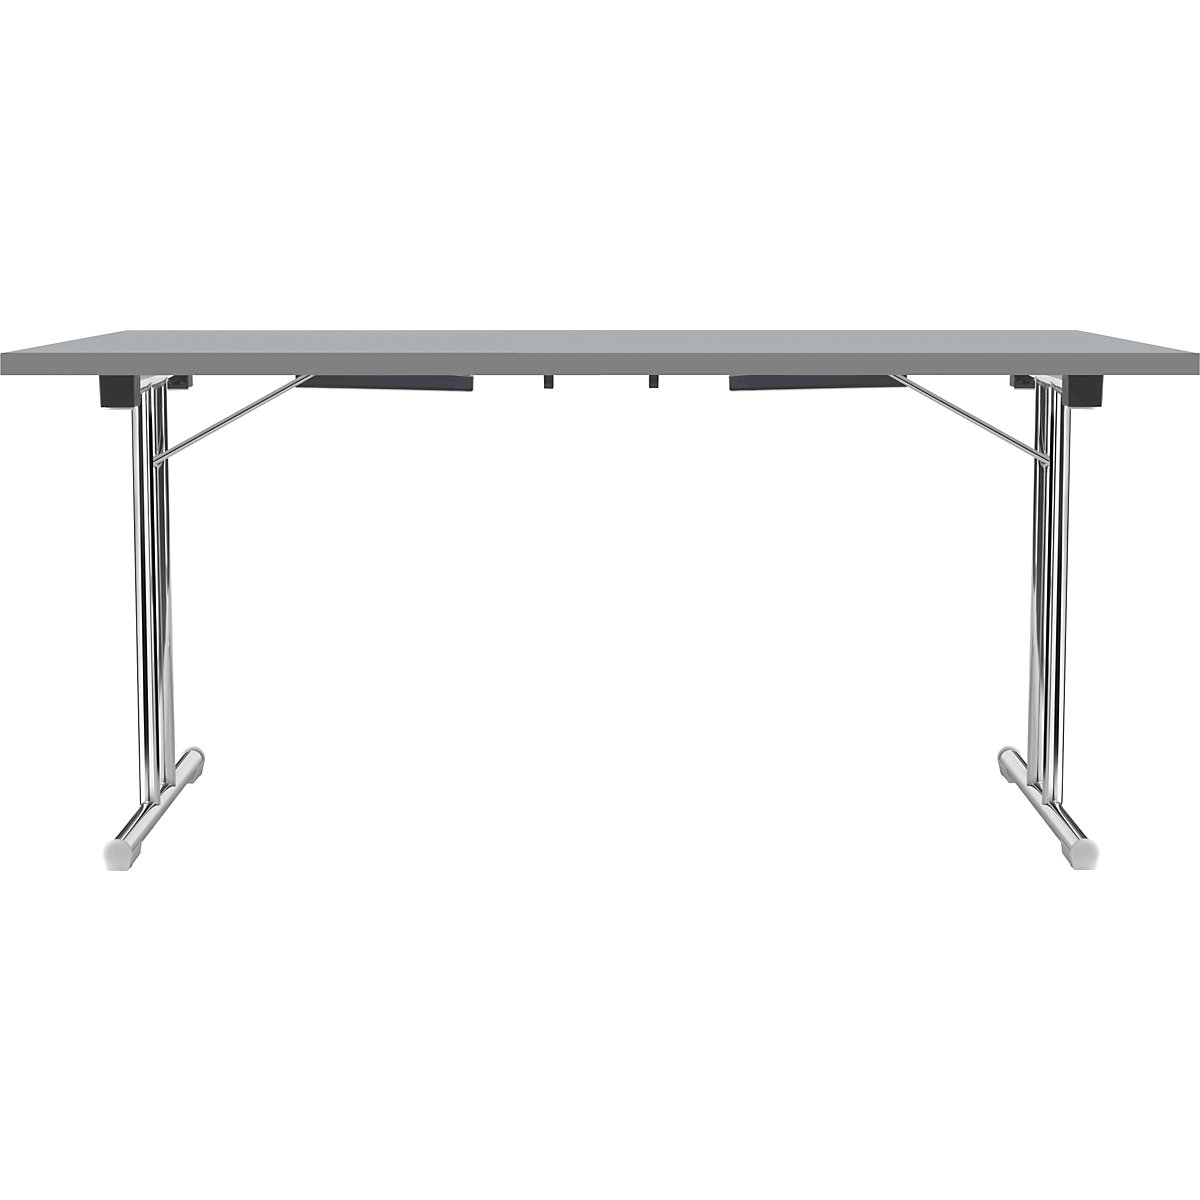 Folding table with double T base, tubular steel frame, chrome plated, light grey/charcoal, WxD 1400 x 700 mm-12